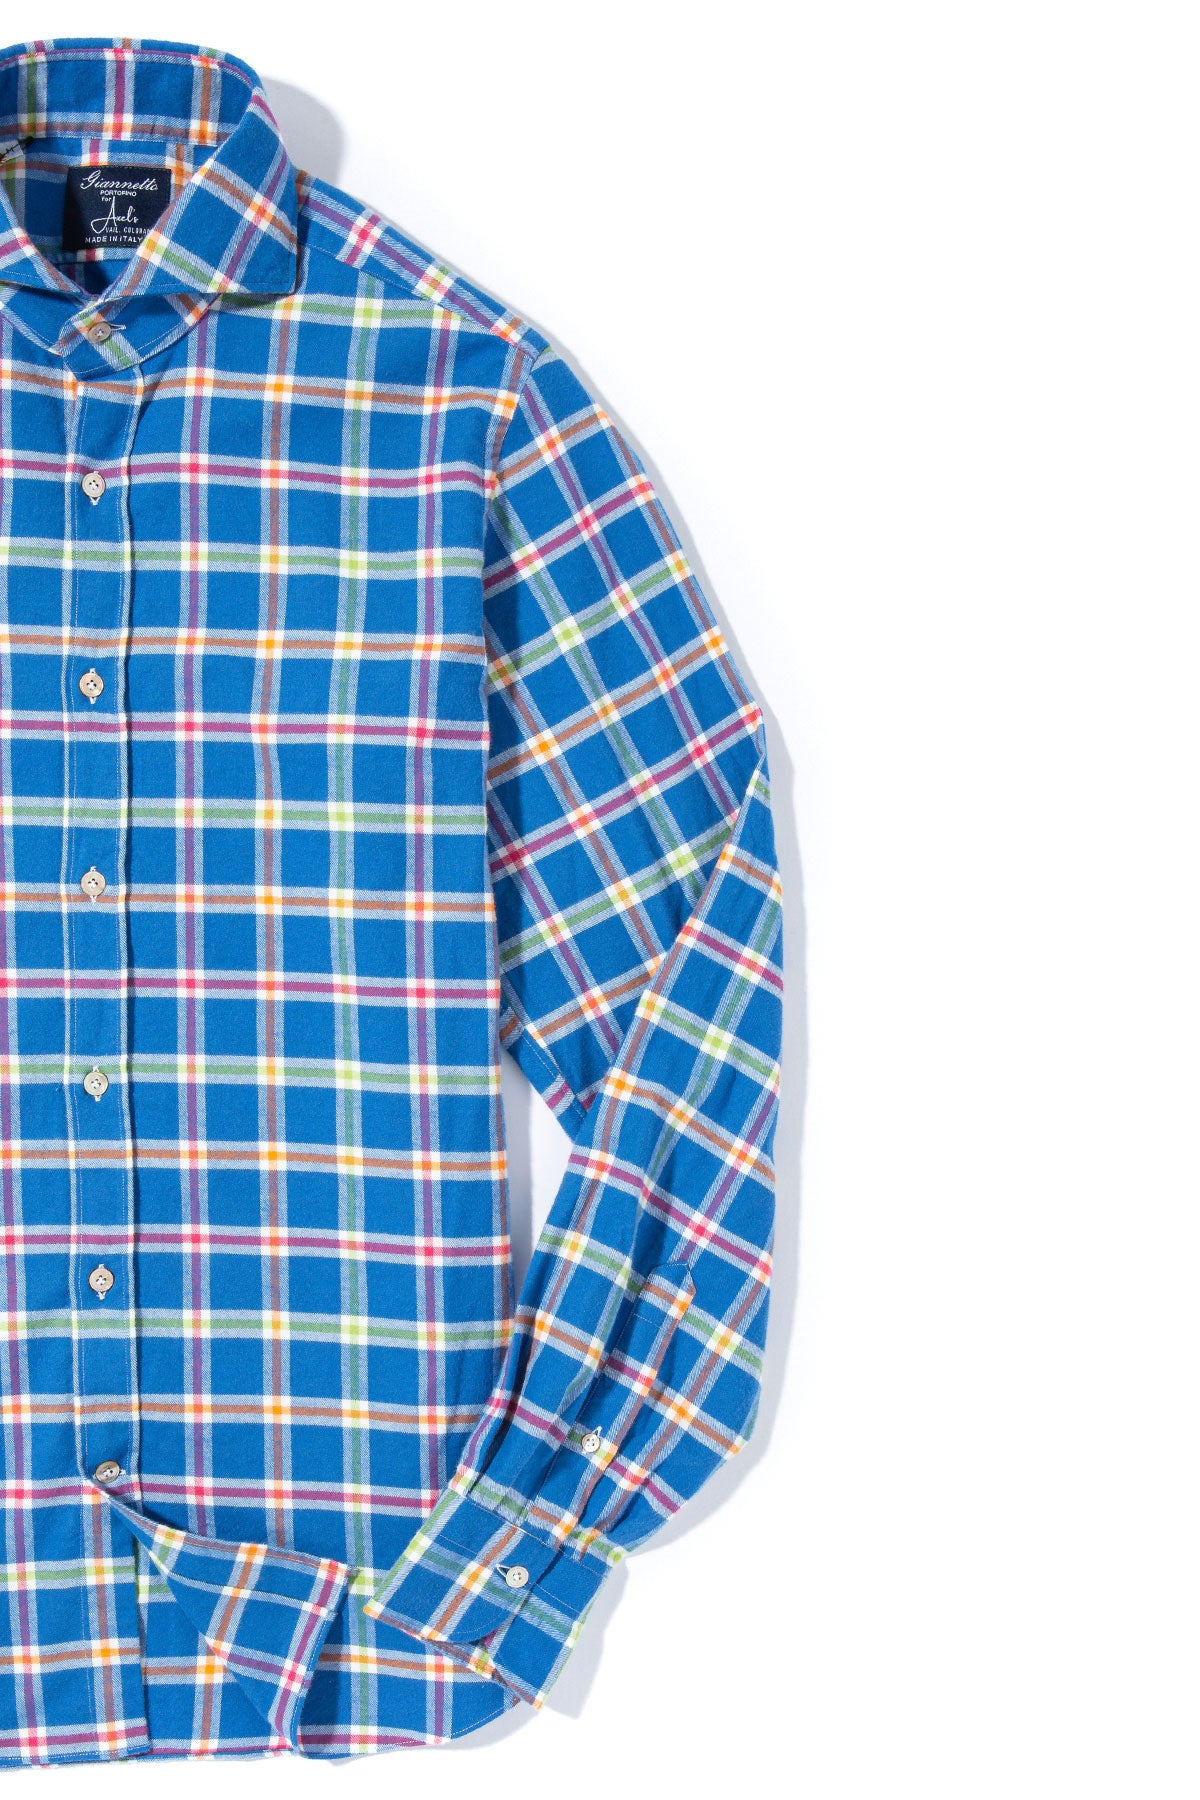 Amedee Brushed Cotton Check in Royal and Orange | Mens - Shirts | Axels GP